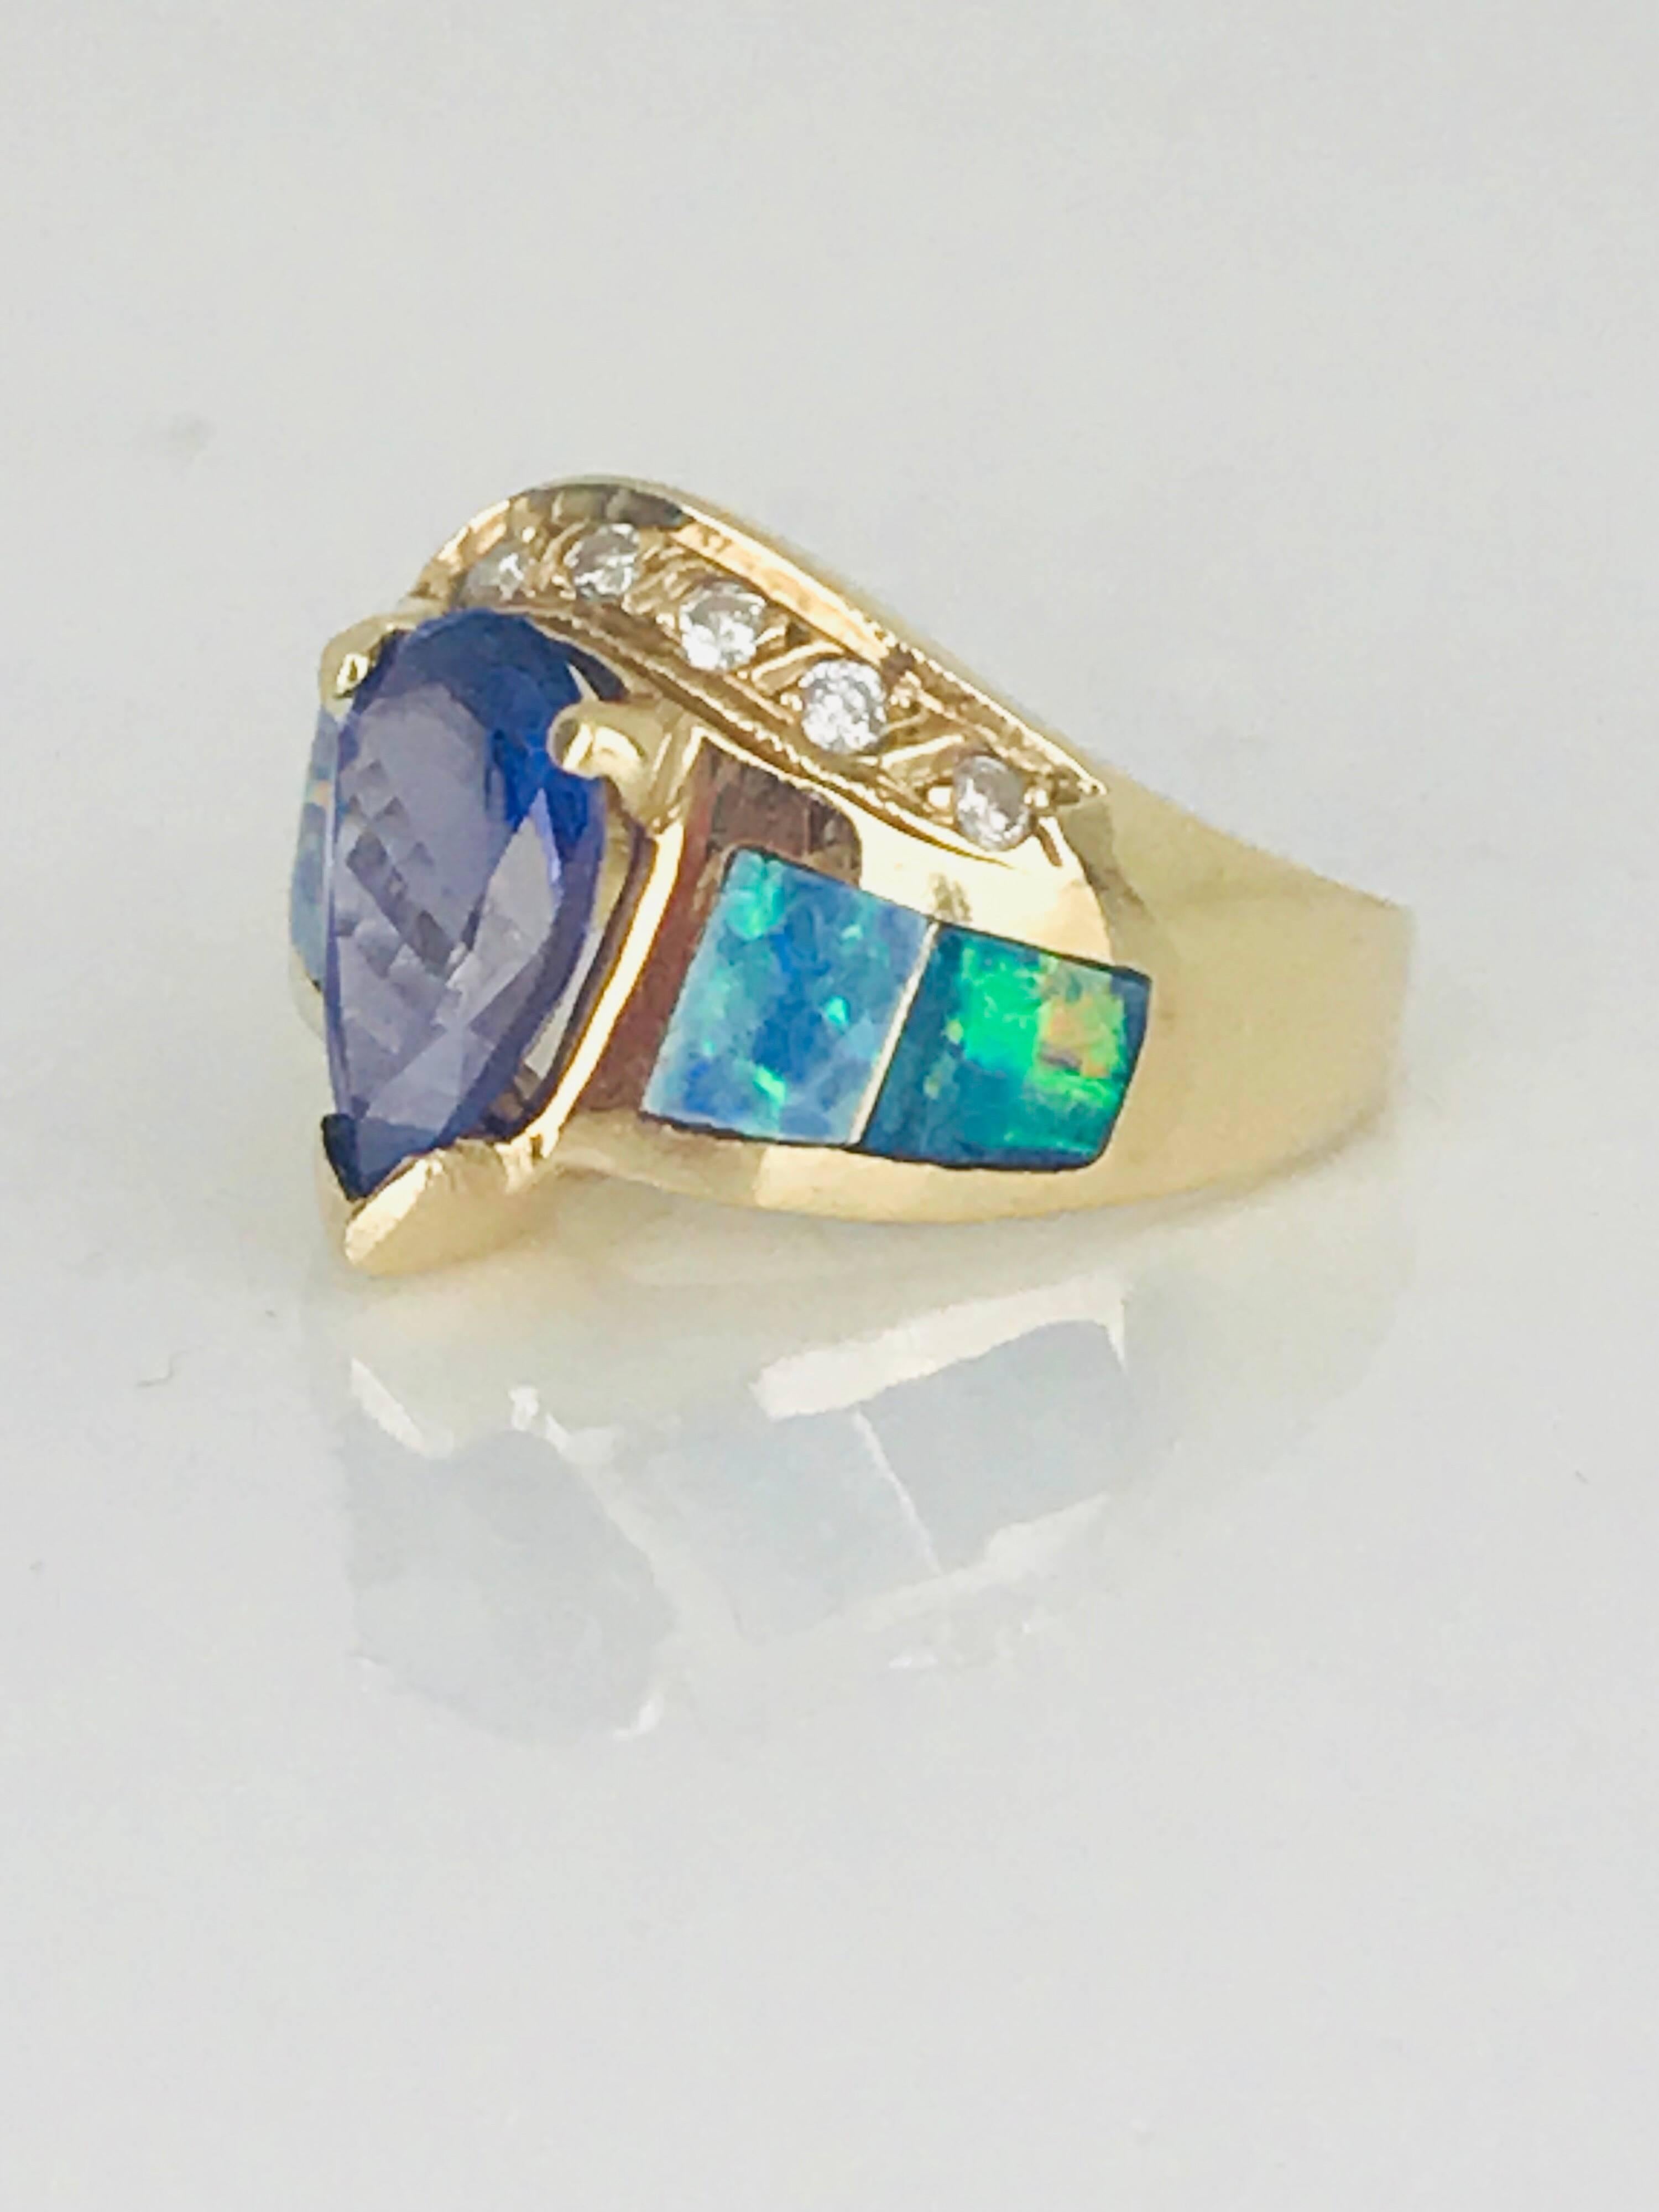 Timeless, 14 karat yellow gold ring with pear-shaped Tanzanite center stone accented with Austrialian opals. The Tanzanite measures 11.43 x 6.47 x 3.00 millimeters in diameter.  The estimated weight of the center stone is 1.40 carat.
Accenting ring